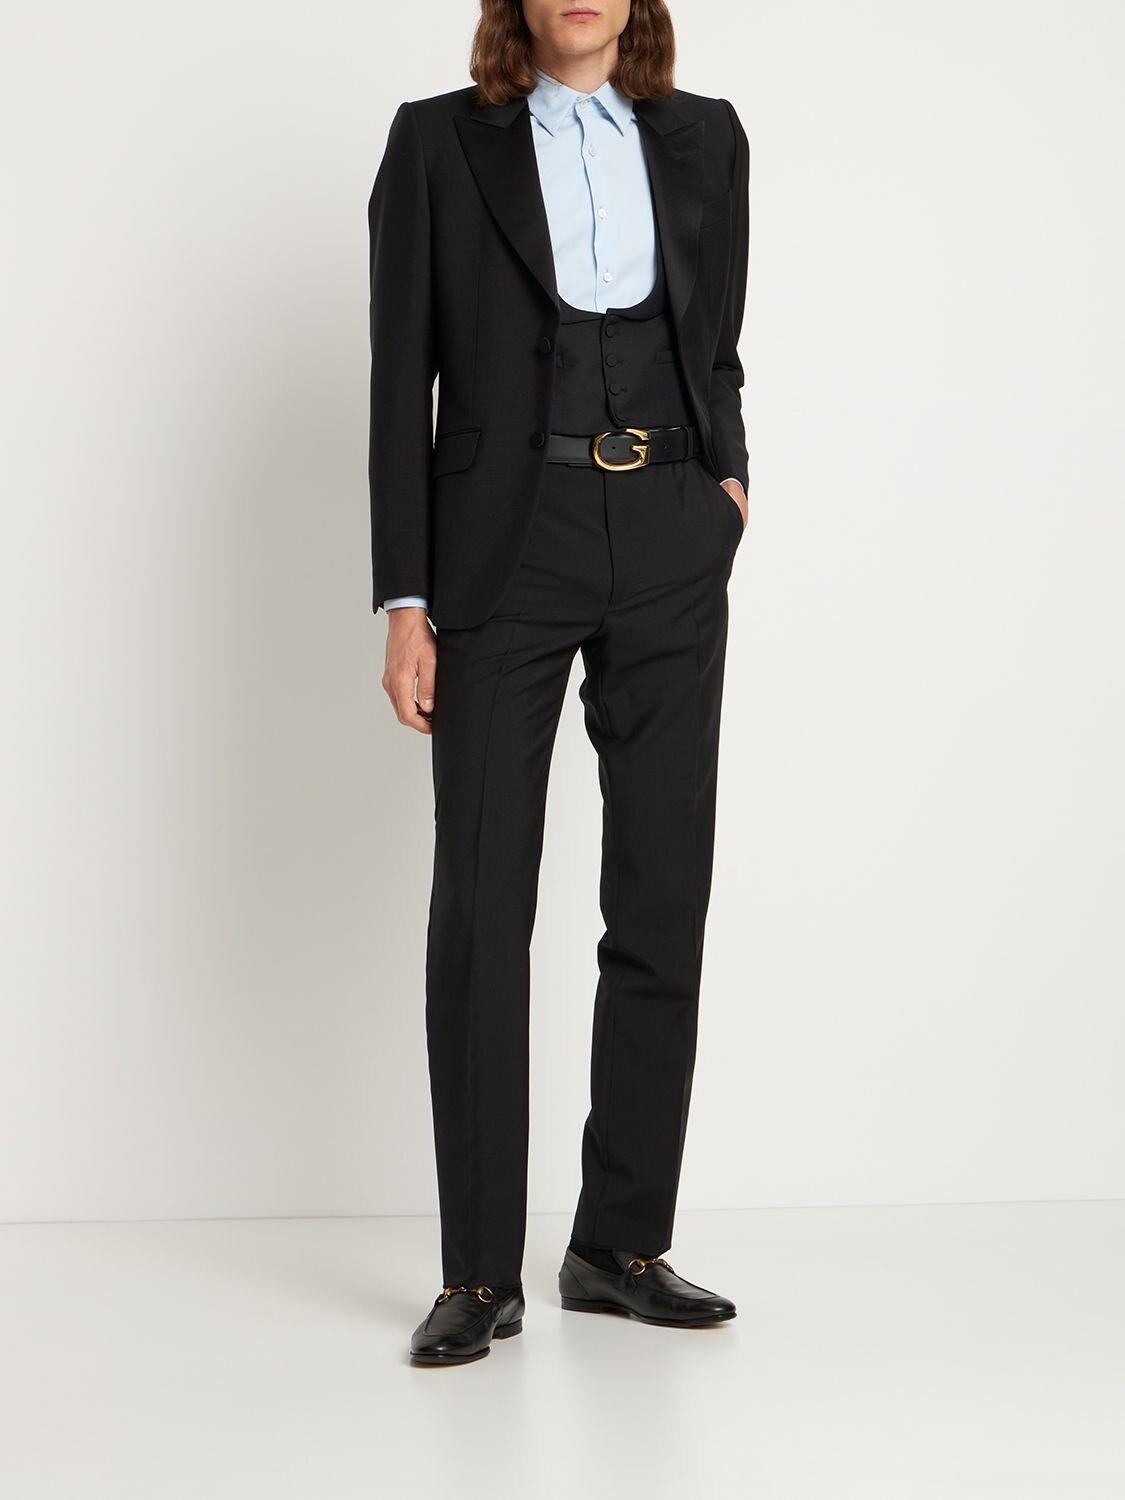 Gucci Mohair & Wool Heritage Tuxedo in Black for Men | Lyst